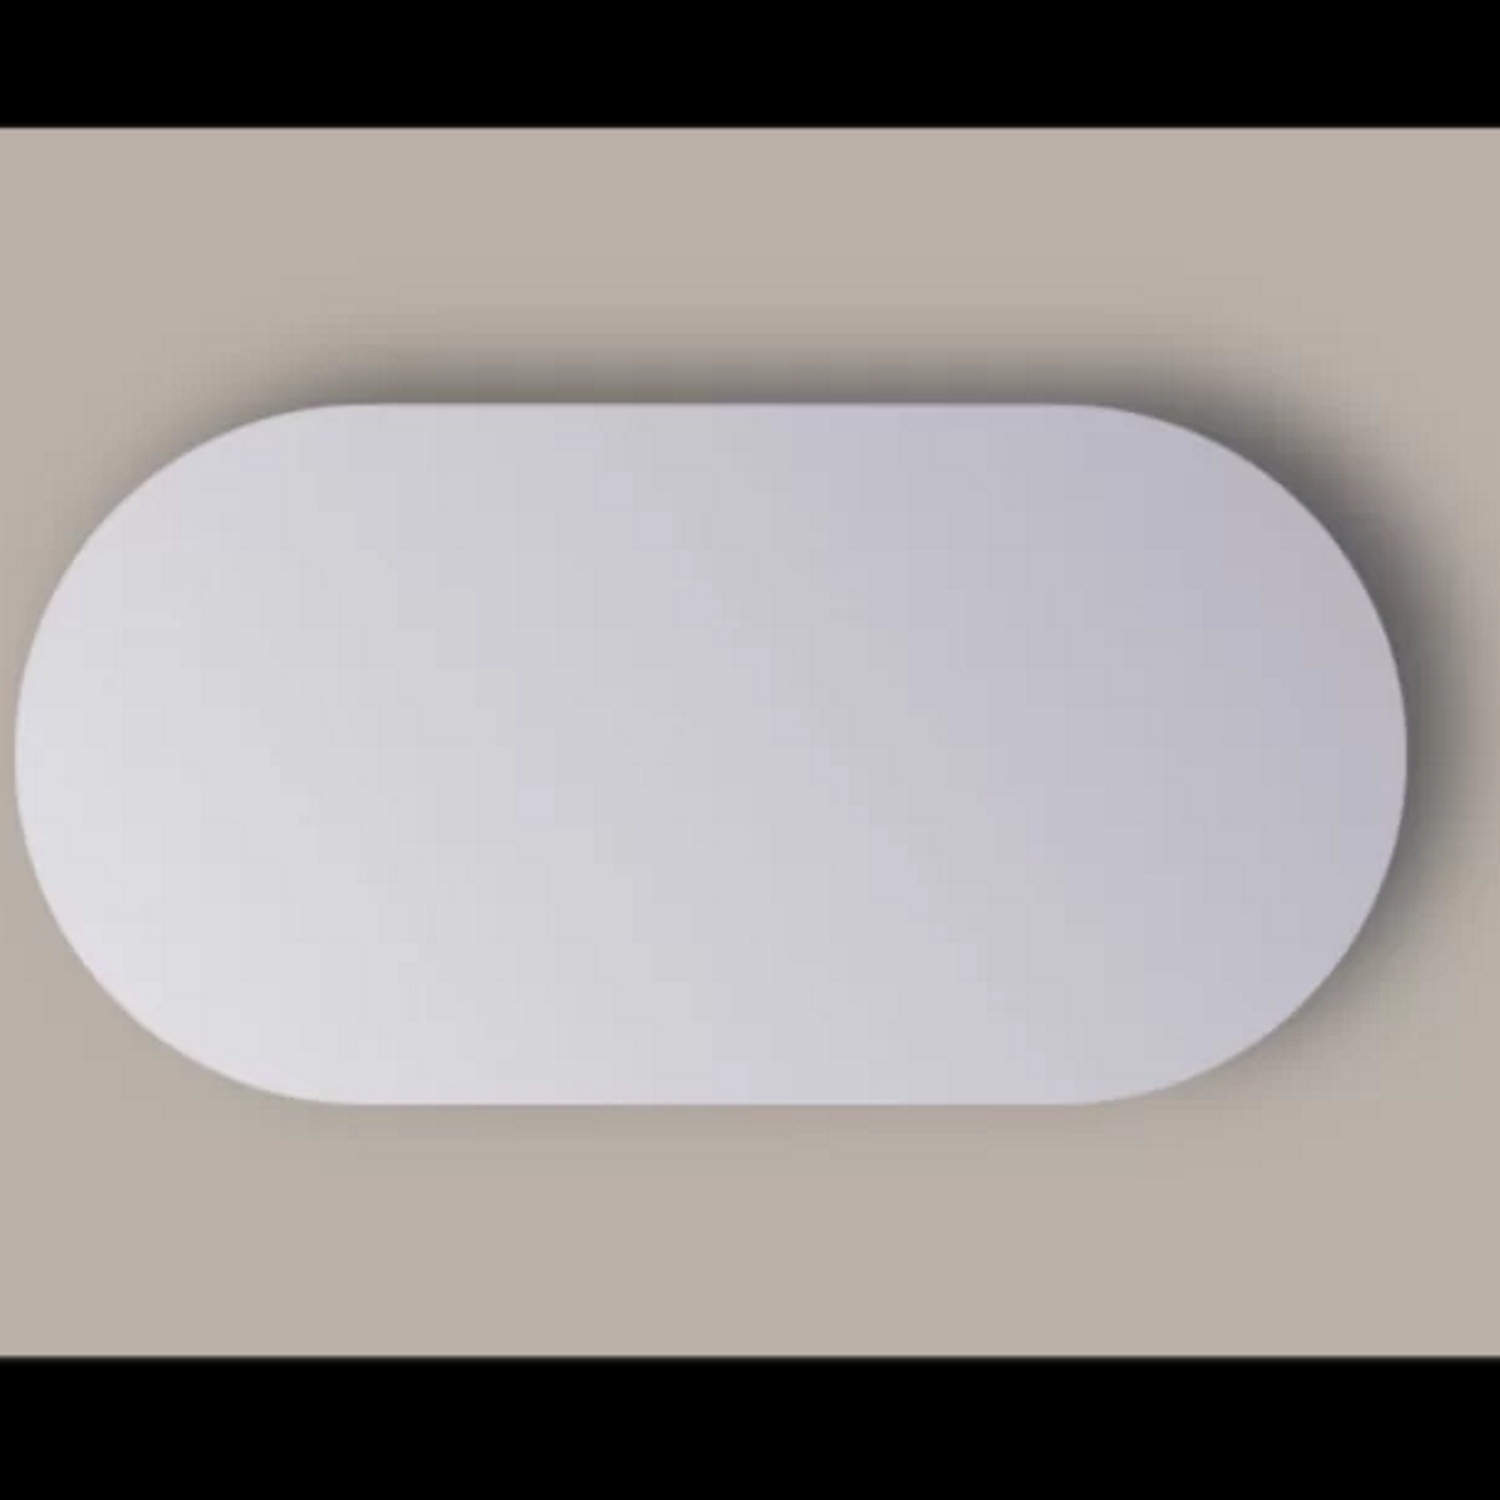 Spiegel Sanicare Q-Mirrors 70x120 cm Ovaal-Rond incl. ophangmateriaal Sanicare